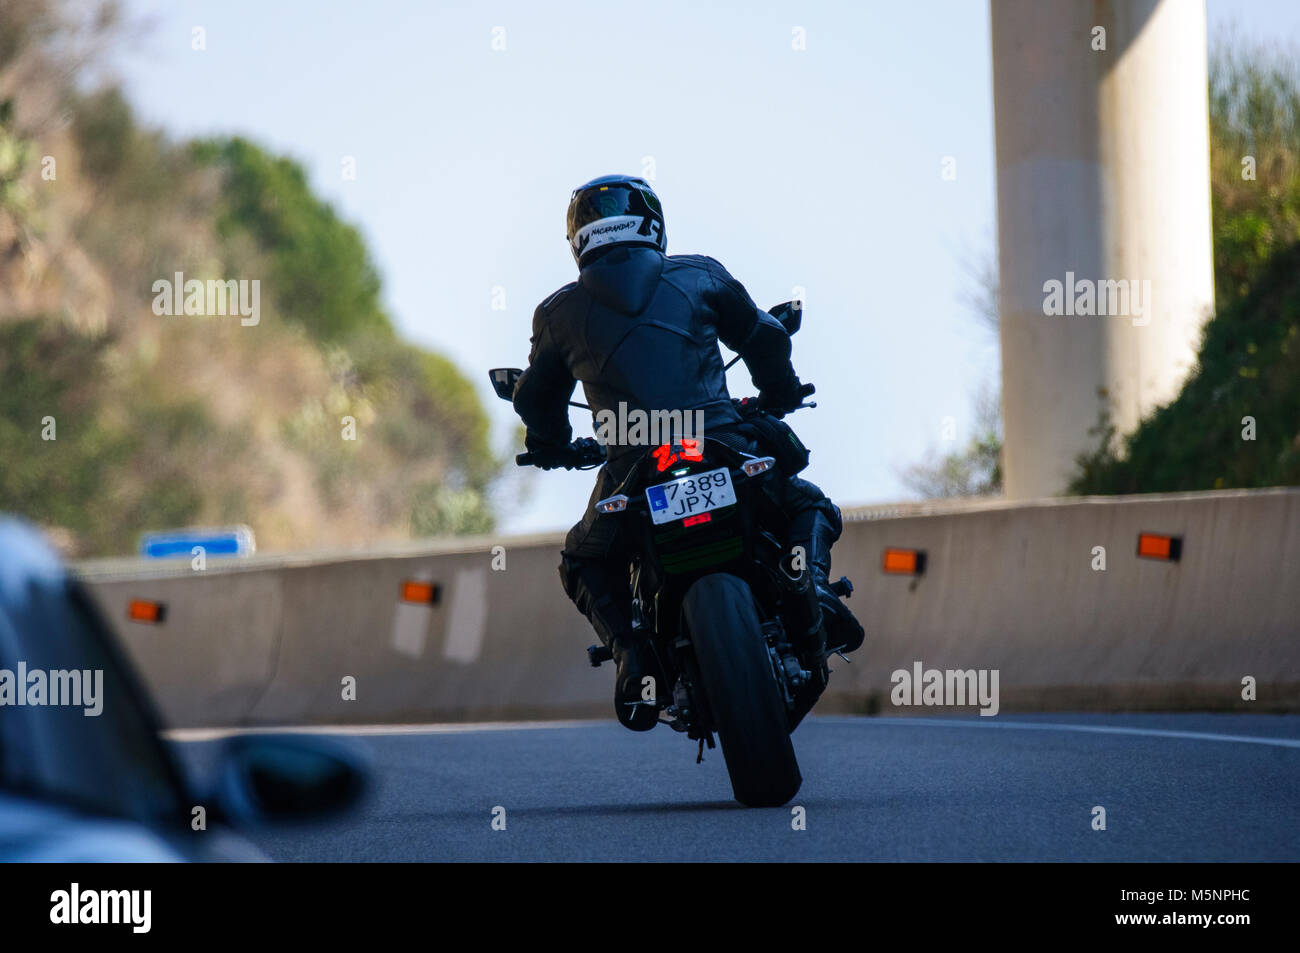 Weekend time, sport, riding, cycling, motorcycling, for fun Stock Photo